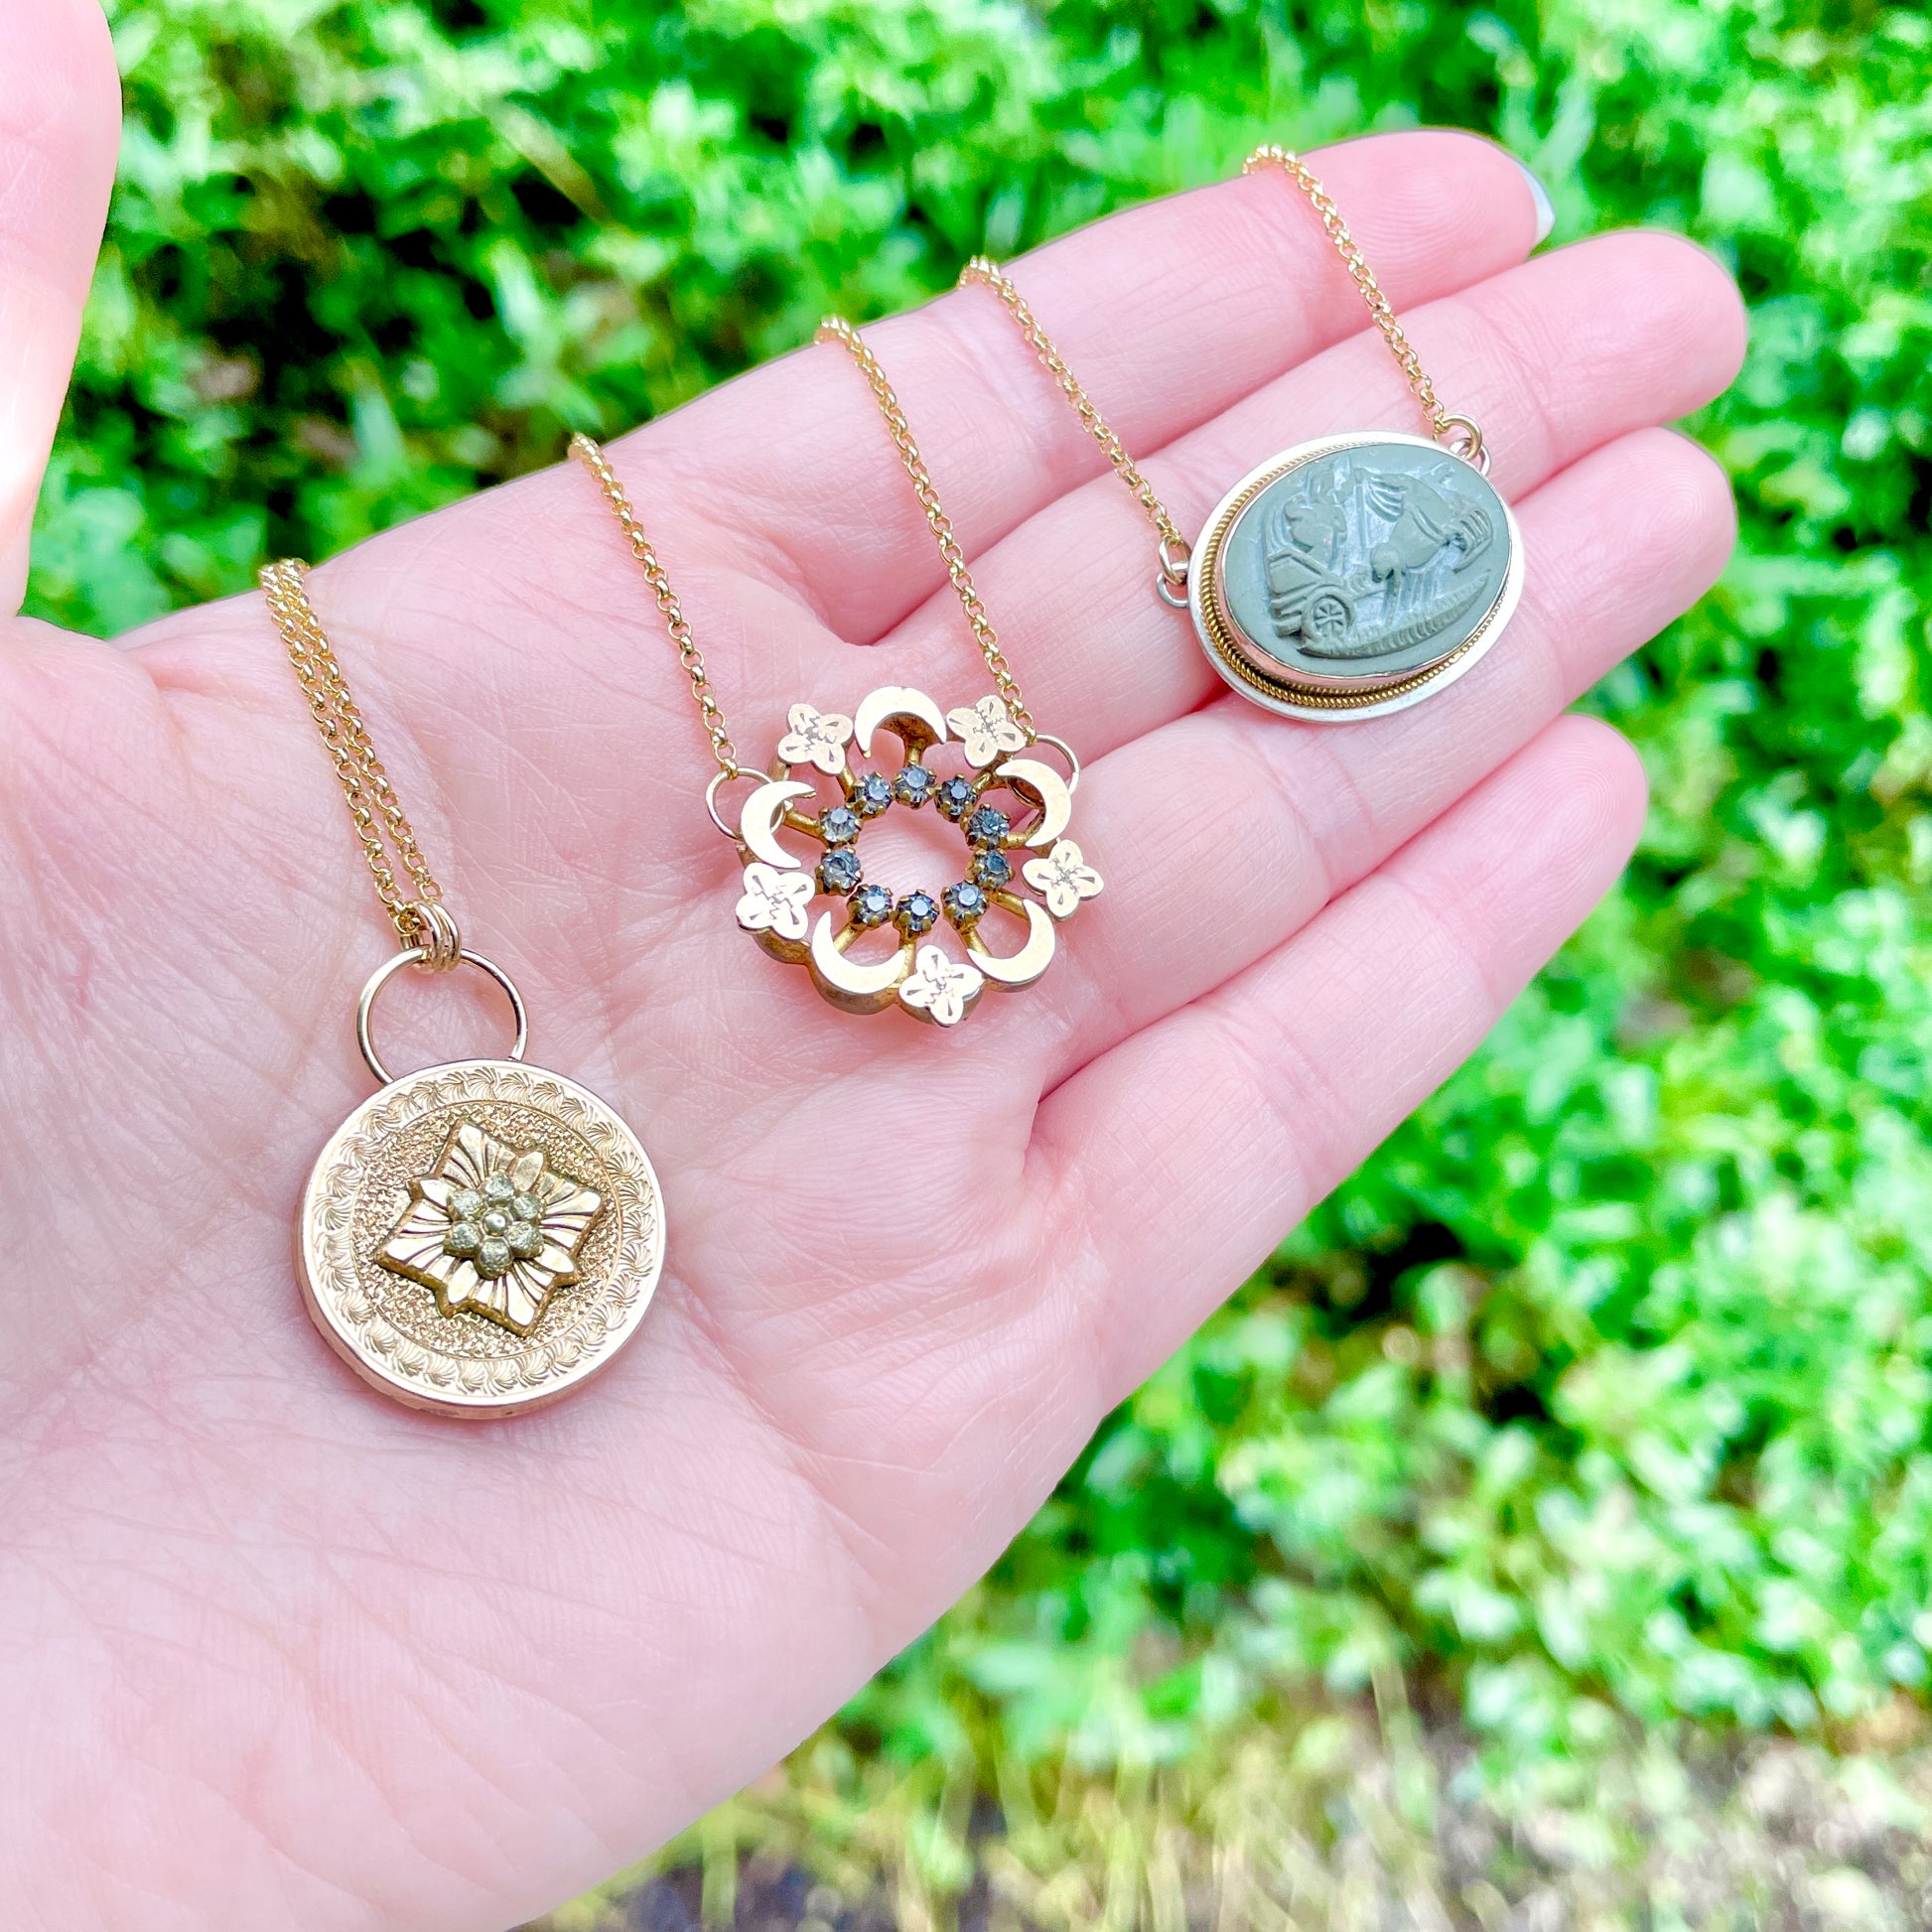 Three antique conversion pendant necklaces laying on the palm side of a left hand with green foliage in the background.